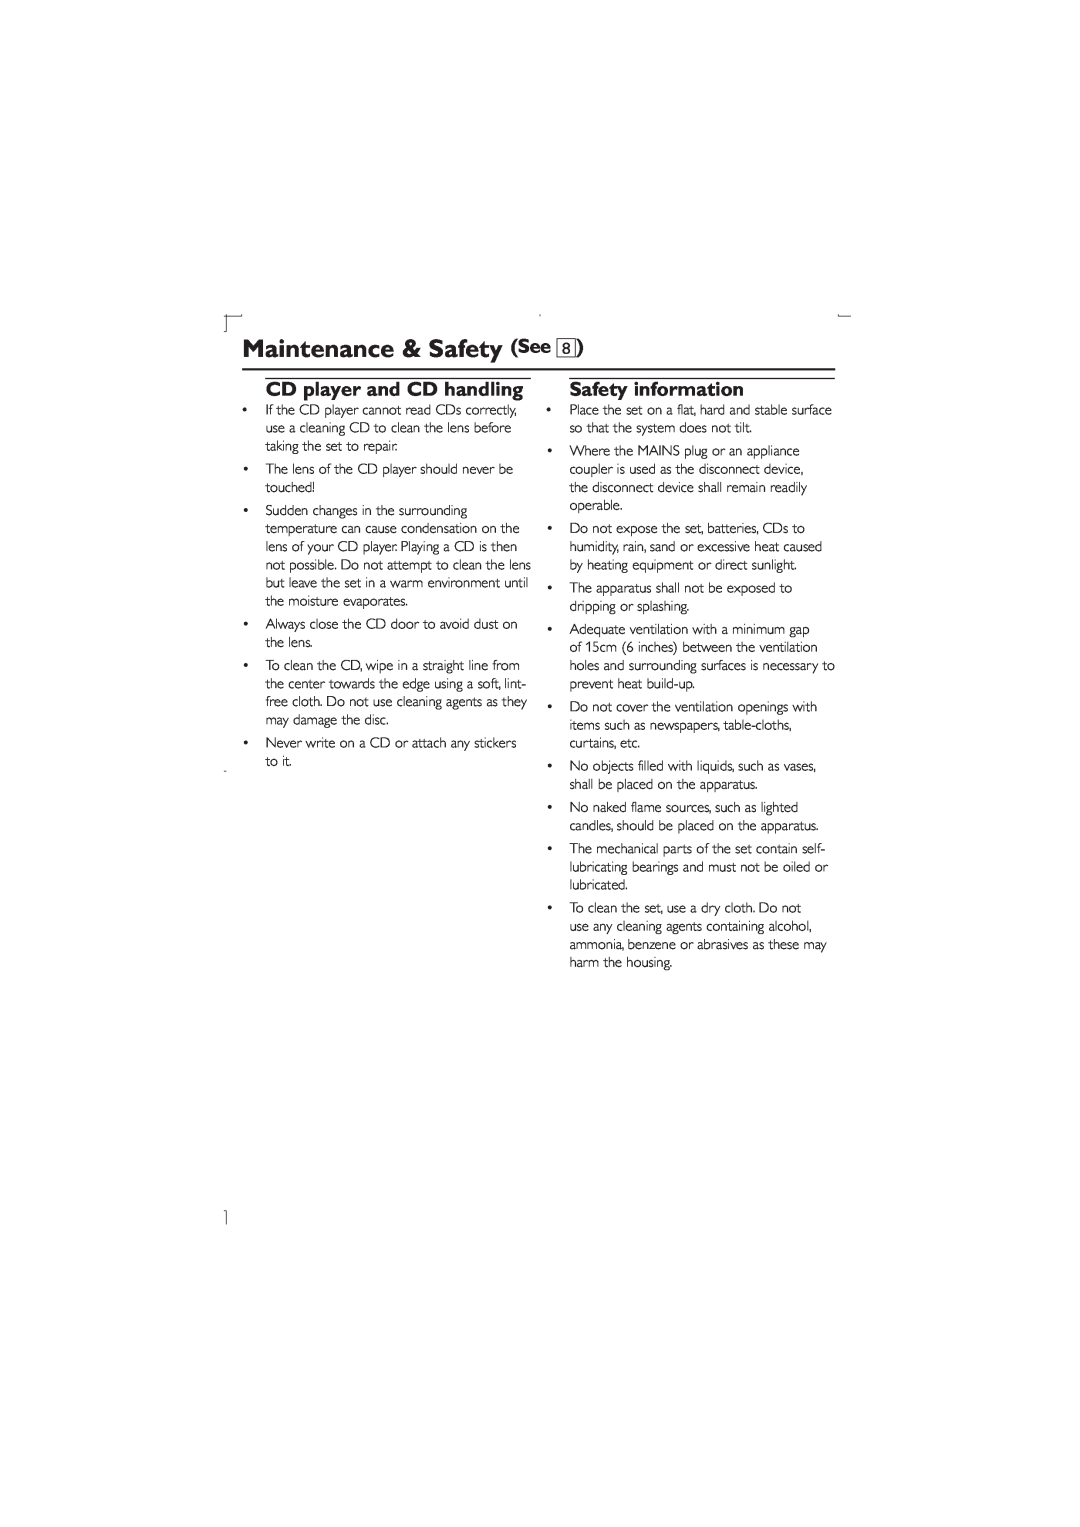 Philips AZ302 user manual Maintenance & Safety See, CD player and CD handling, Safety information 